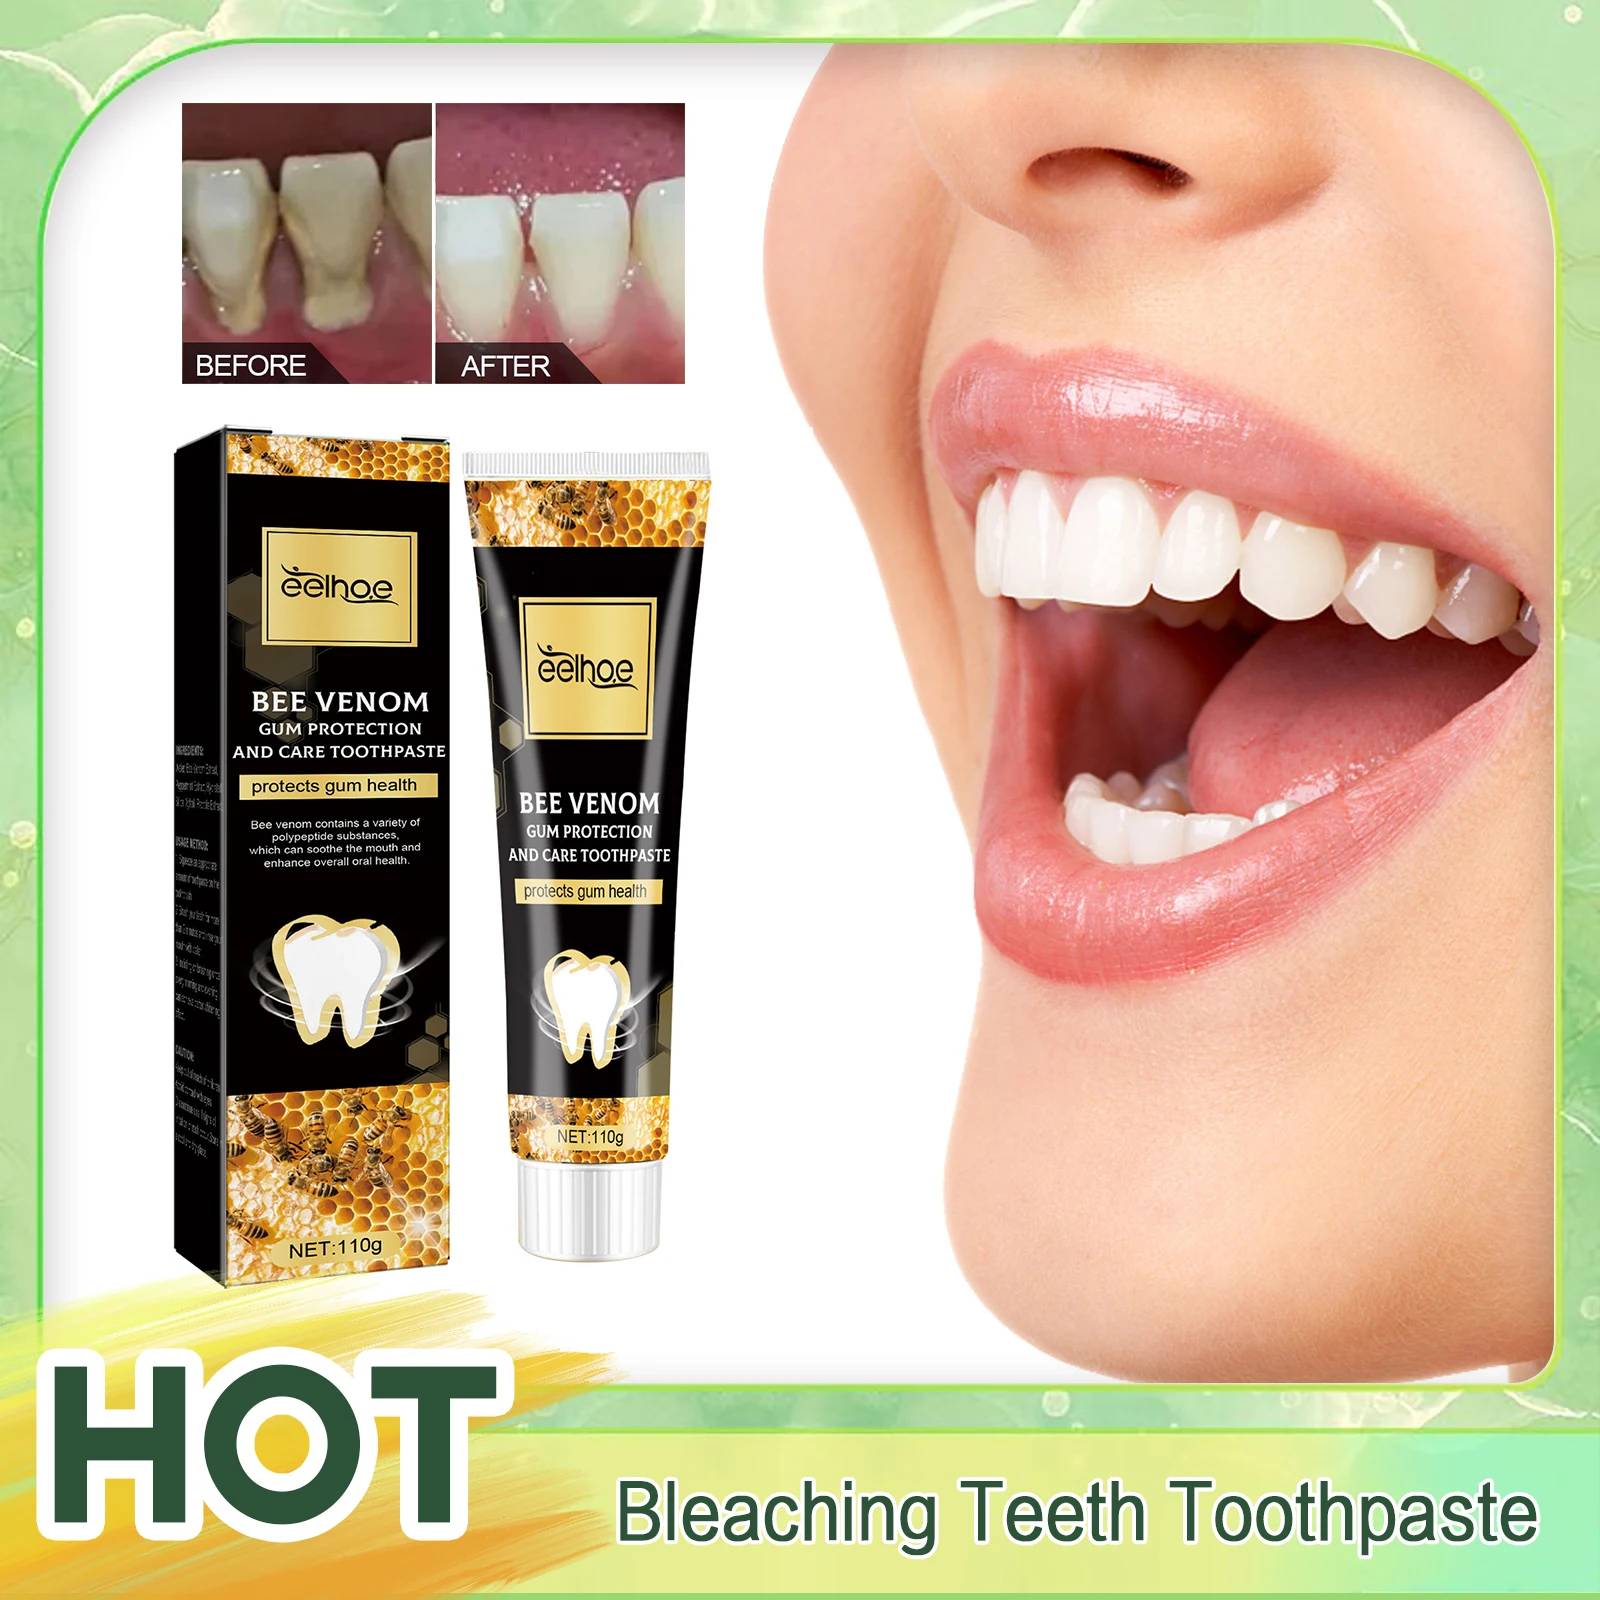 

Gums Repair Toothpaste Remove Plaque Eliminate Bad Breath Gum Treatment Decay Cavities Caries Protect Teeth Whitening Toothpaste